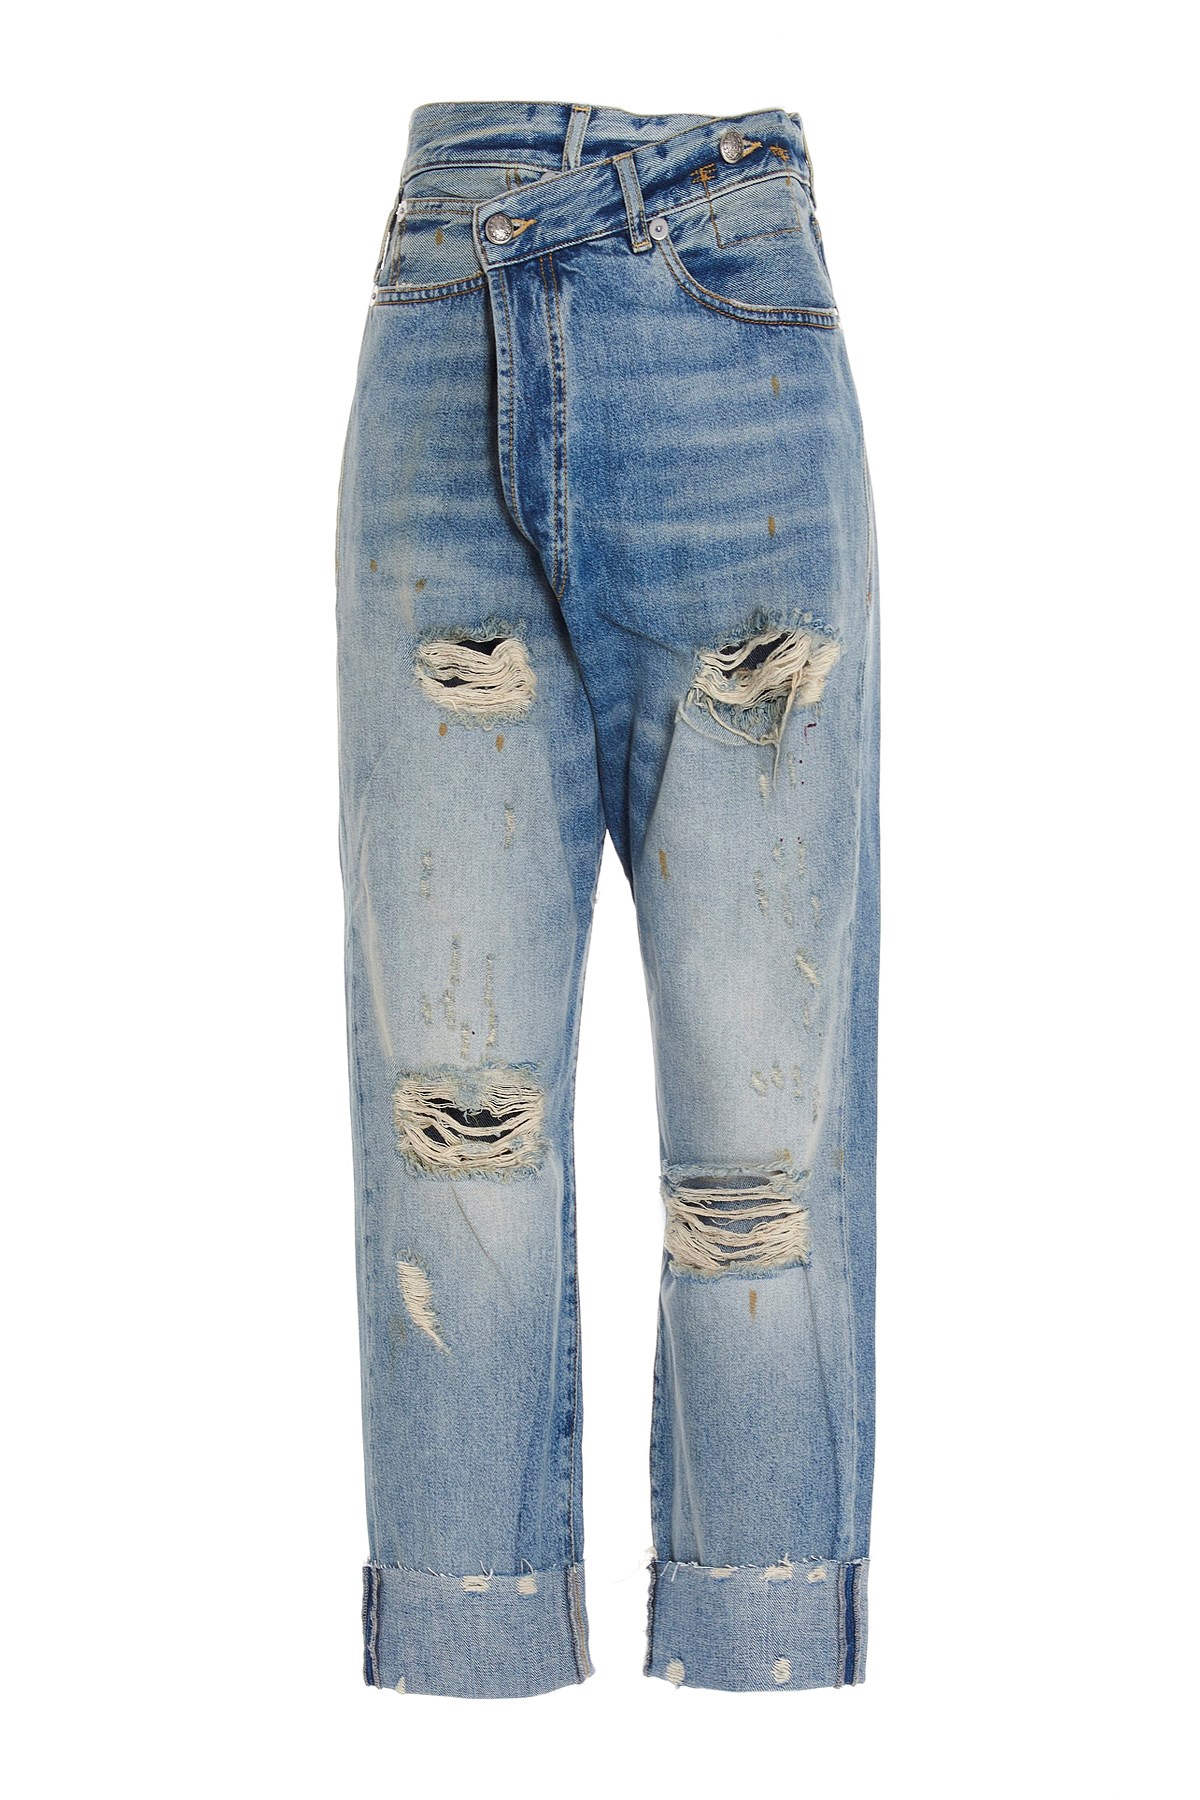 R13 Jeans 'Cross Over'